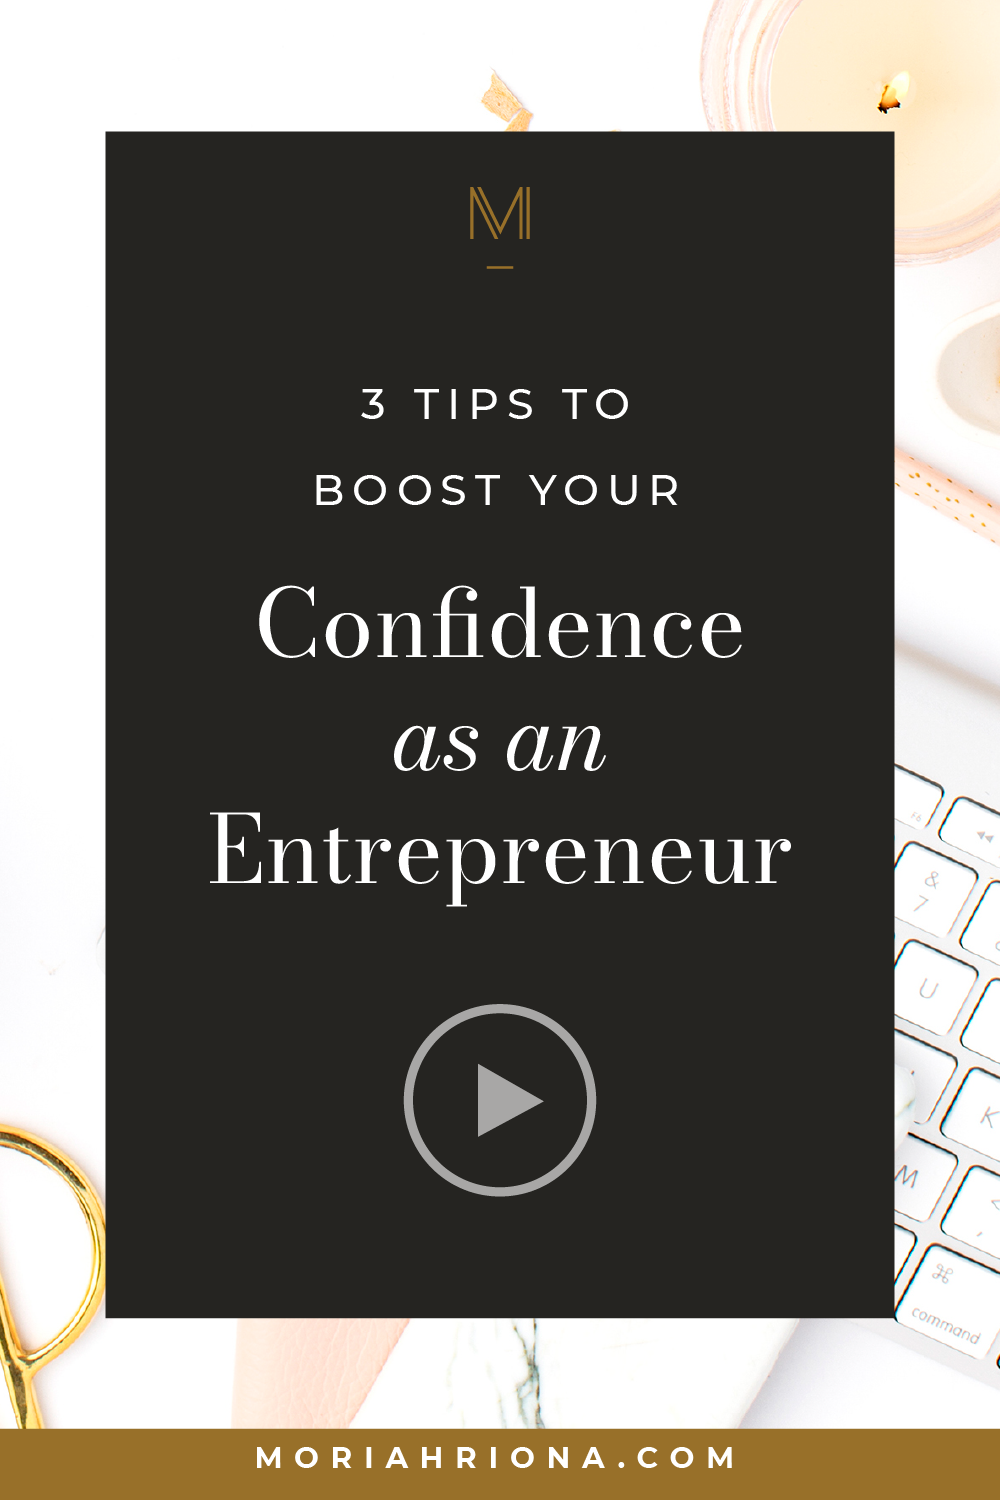 Looking for the best tips for introverts in business? This video is for you! I’m sharing my best introvert motivation, how to show up with confidence, and how confident entrepreneurs show up in business. #introvert #confidence #business #entrepreneur